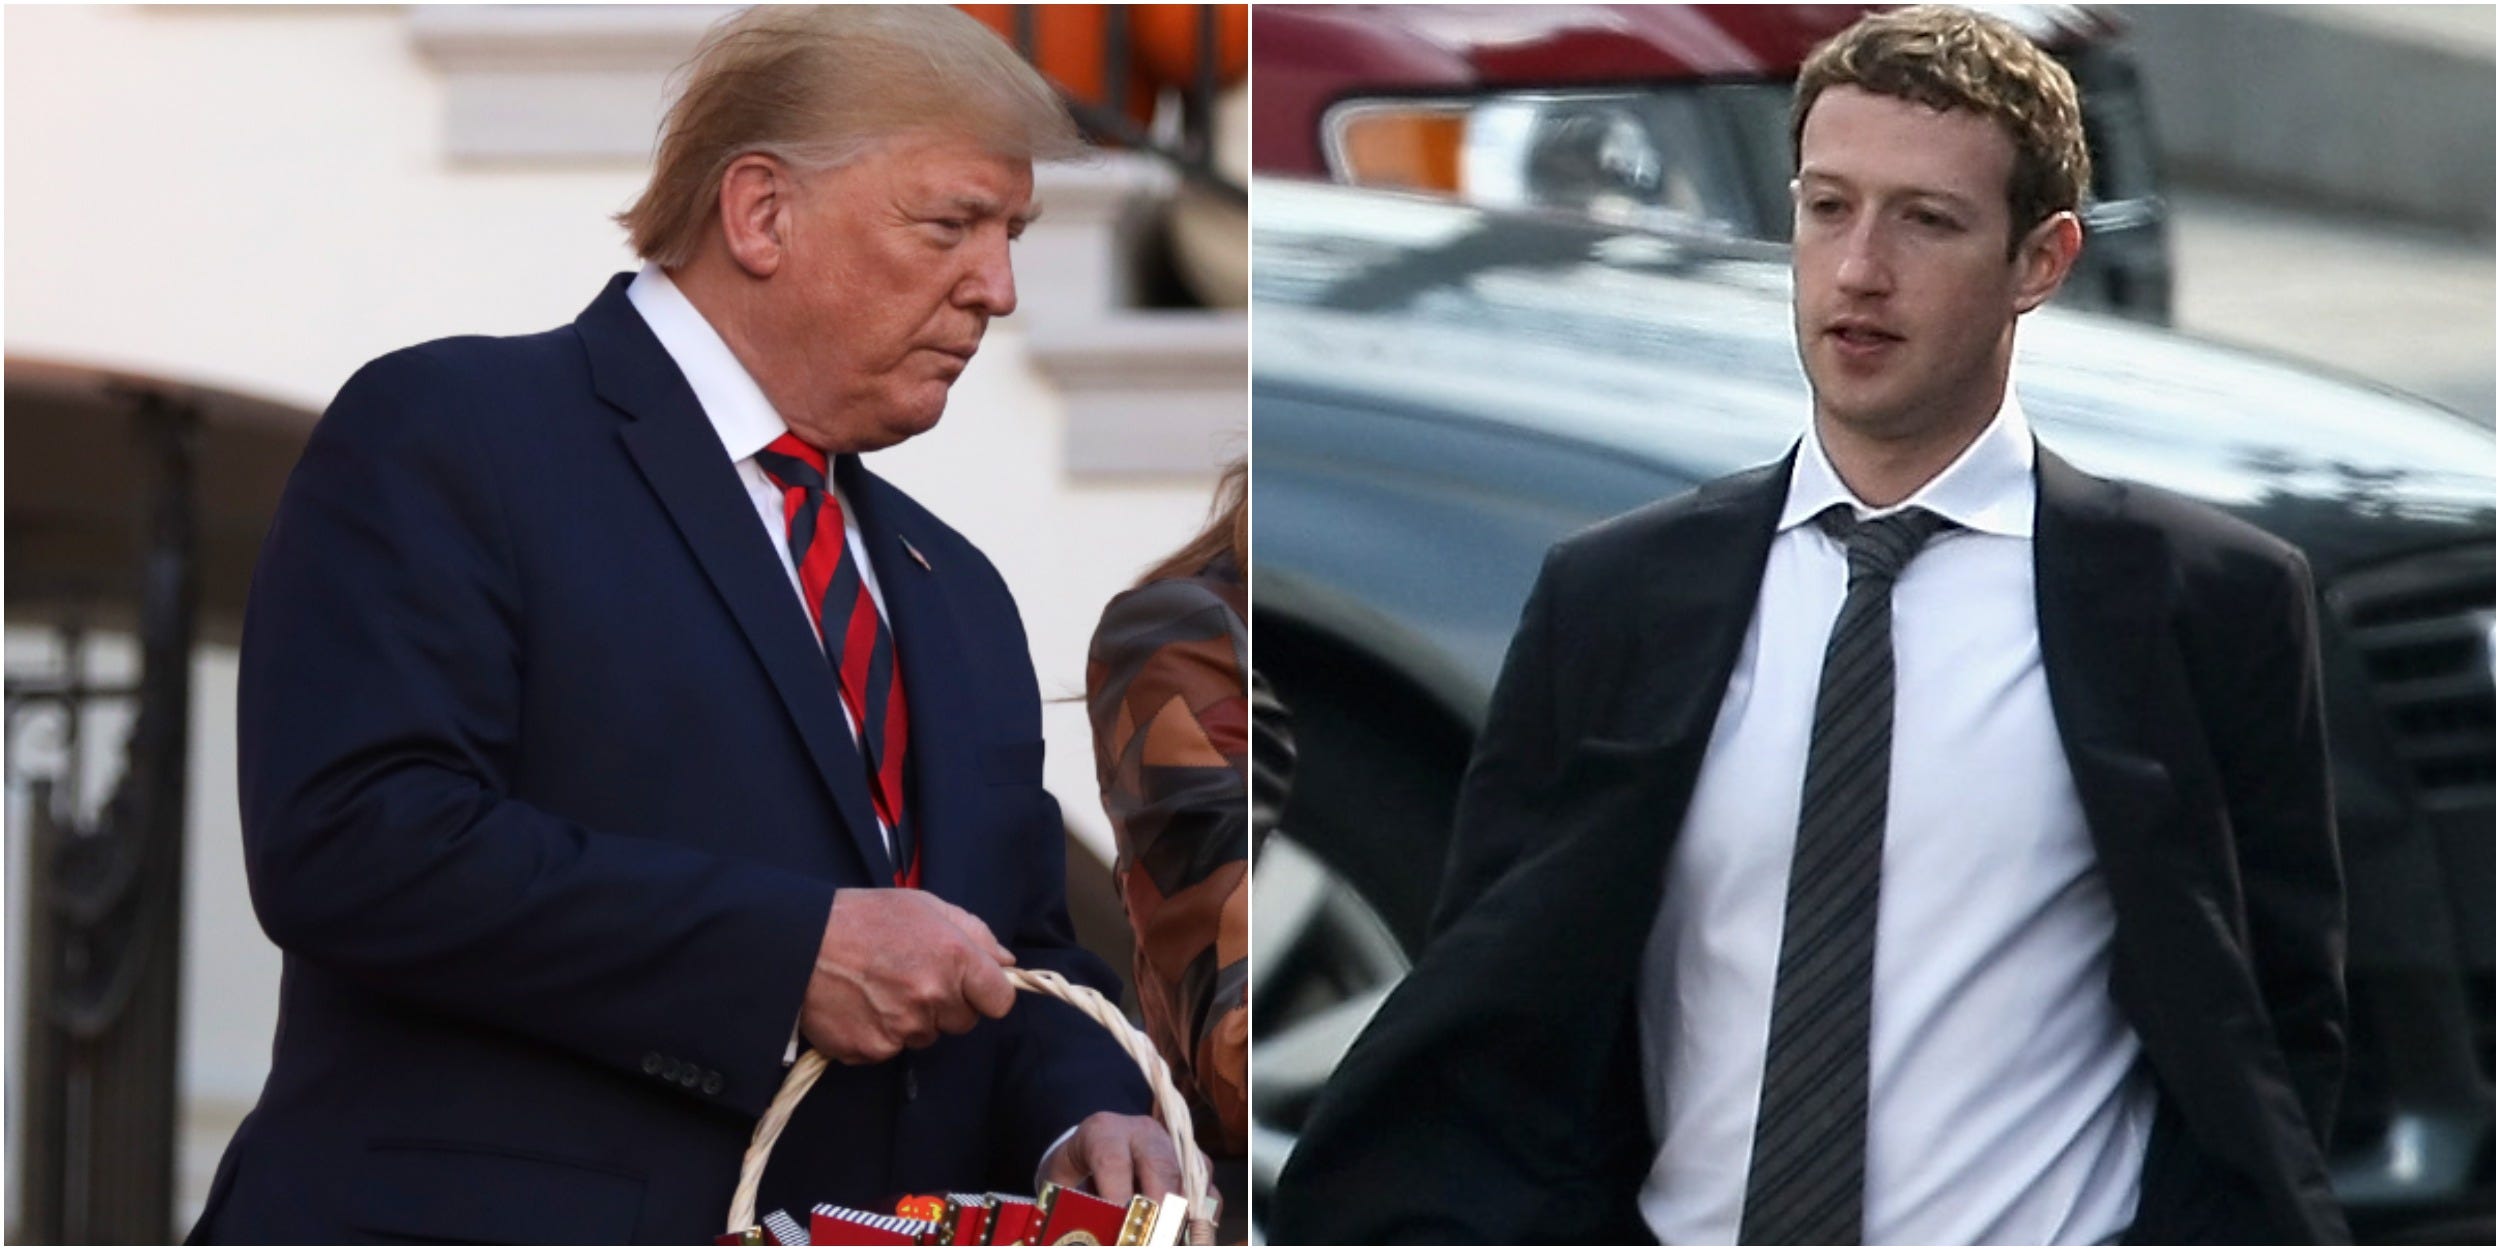 Collage: Former President Donald Trump hands out candy, Meta CEO Mark Zuckerberg walks with his eyes cast down toward the ground.